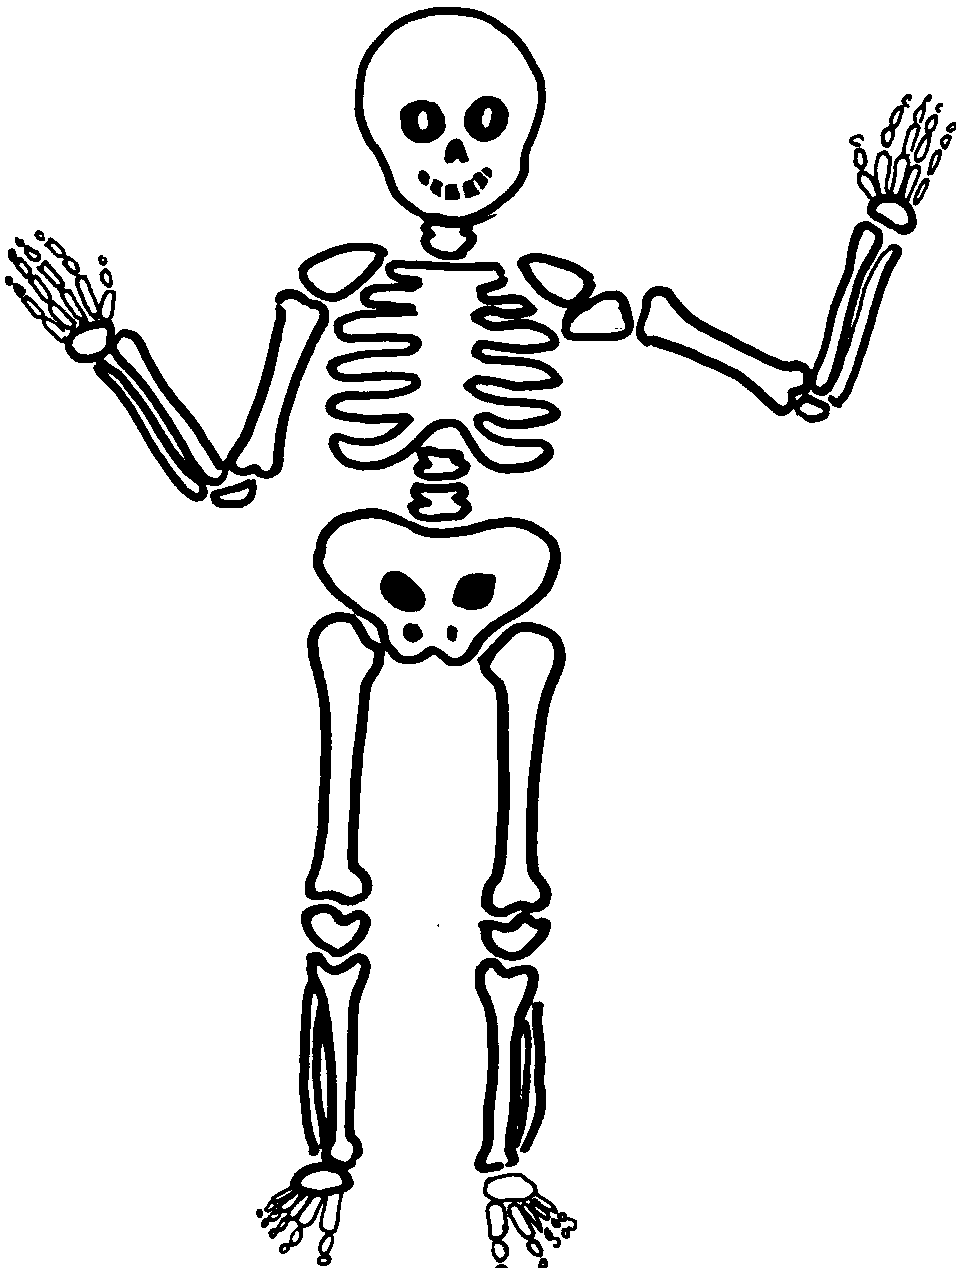 coloring-pages-skeleton-characters-page-3-printable-coloring-pages